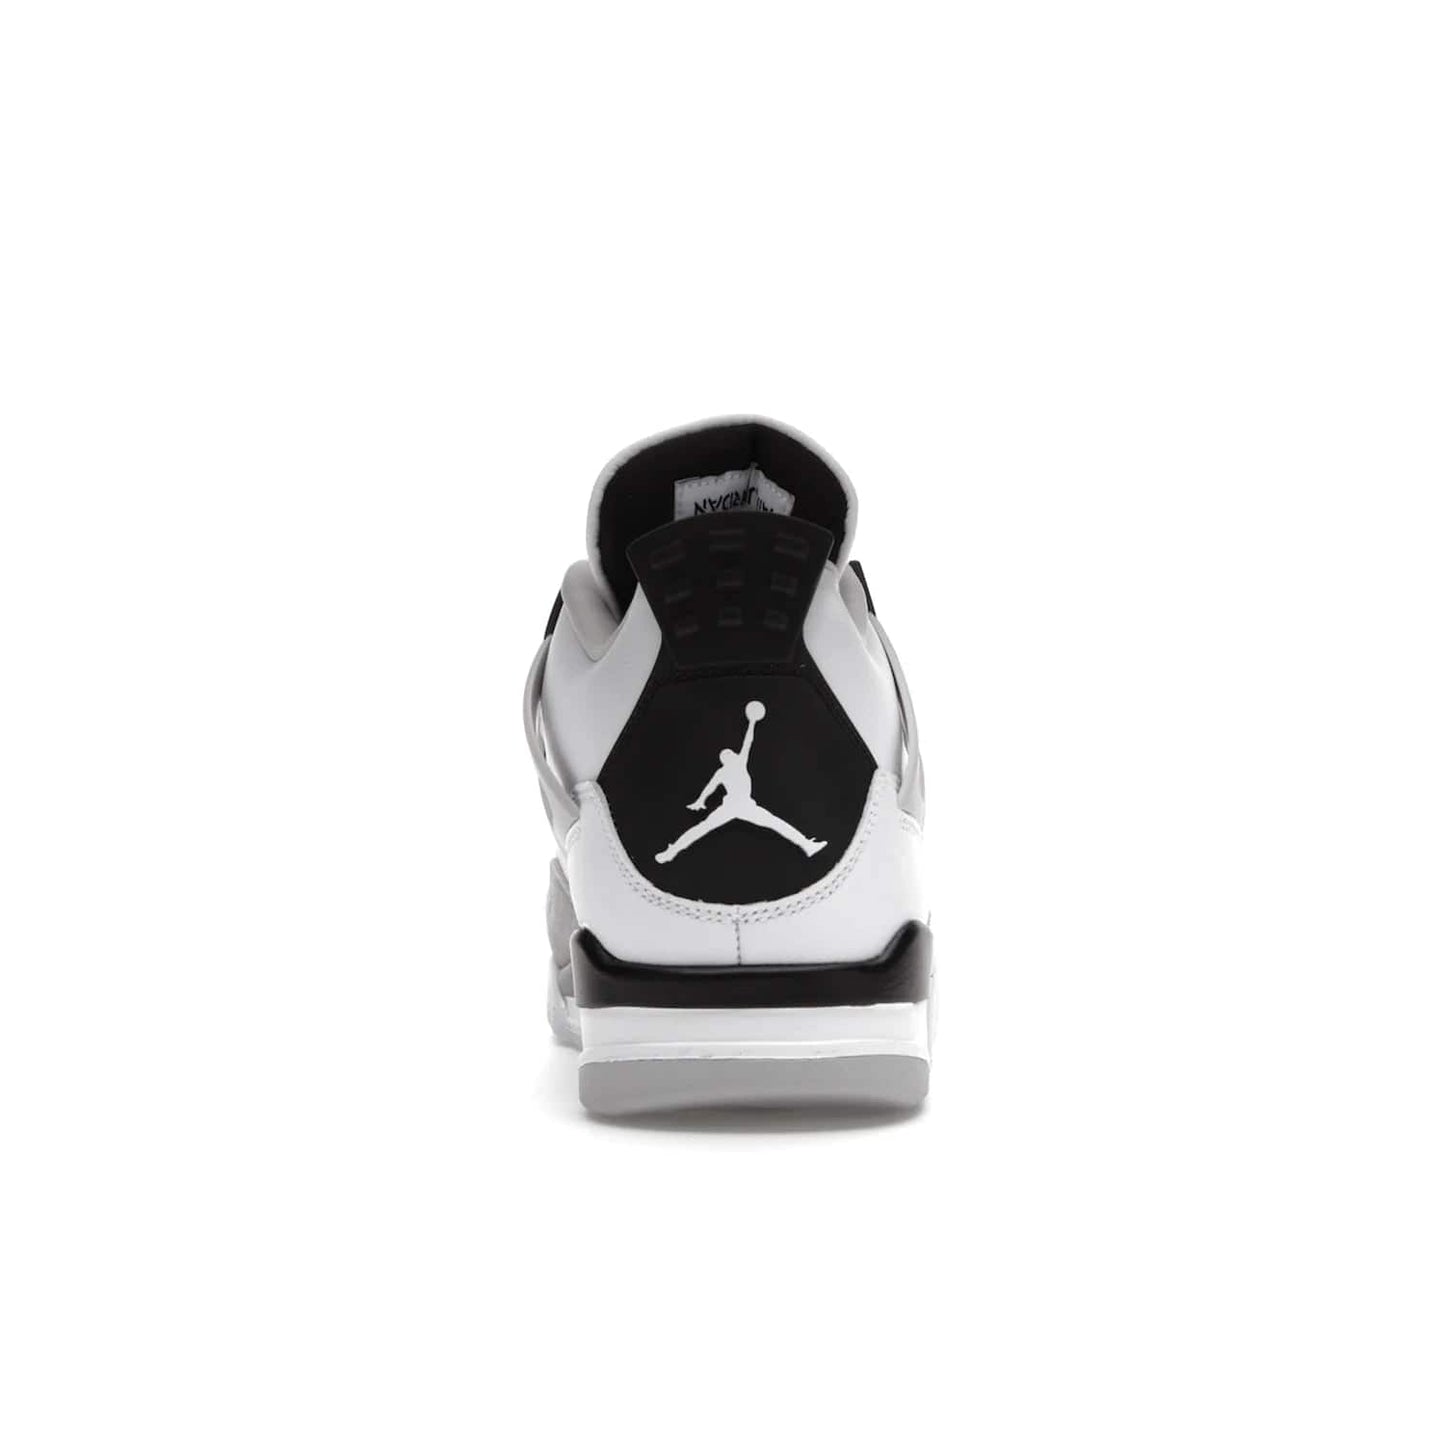 Jordan 4 Retro Military Black - Image 28 - Only at www.BallersClubKickz.com - Updated Air Jordan 4 style with a white/black/light grey sole and visible Air unit. Released in May 2022, offering timeless classic style and comfort.